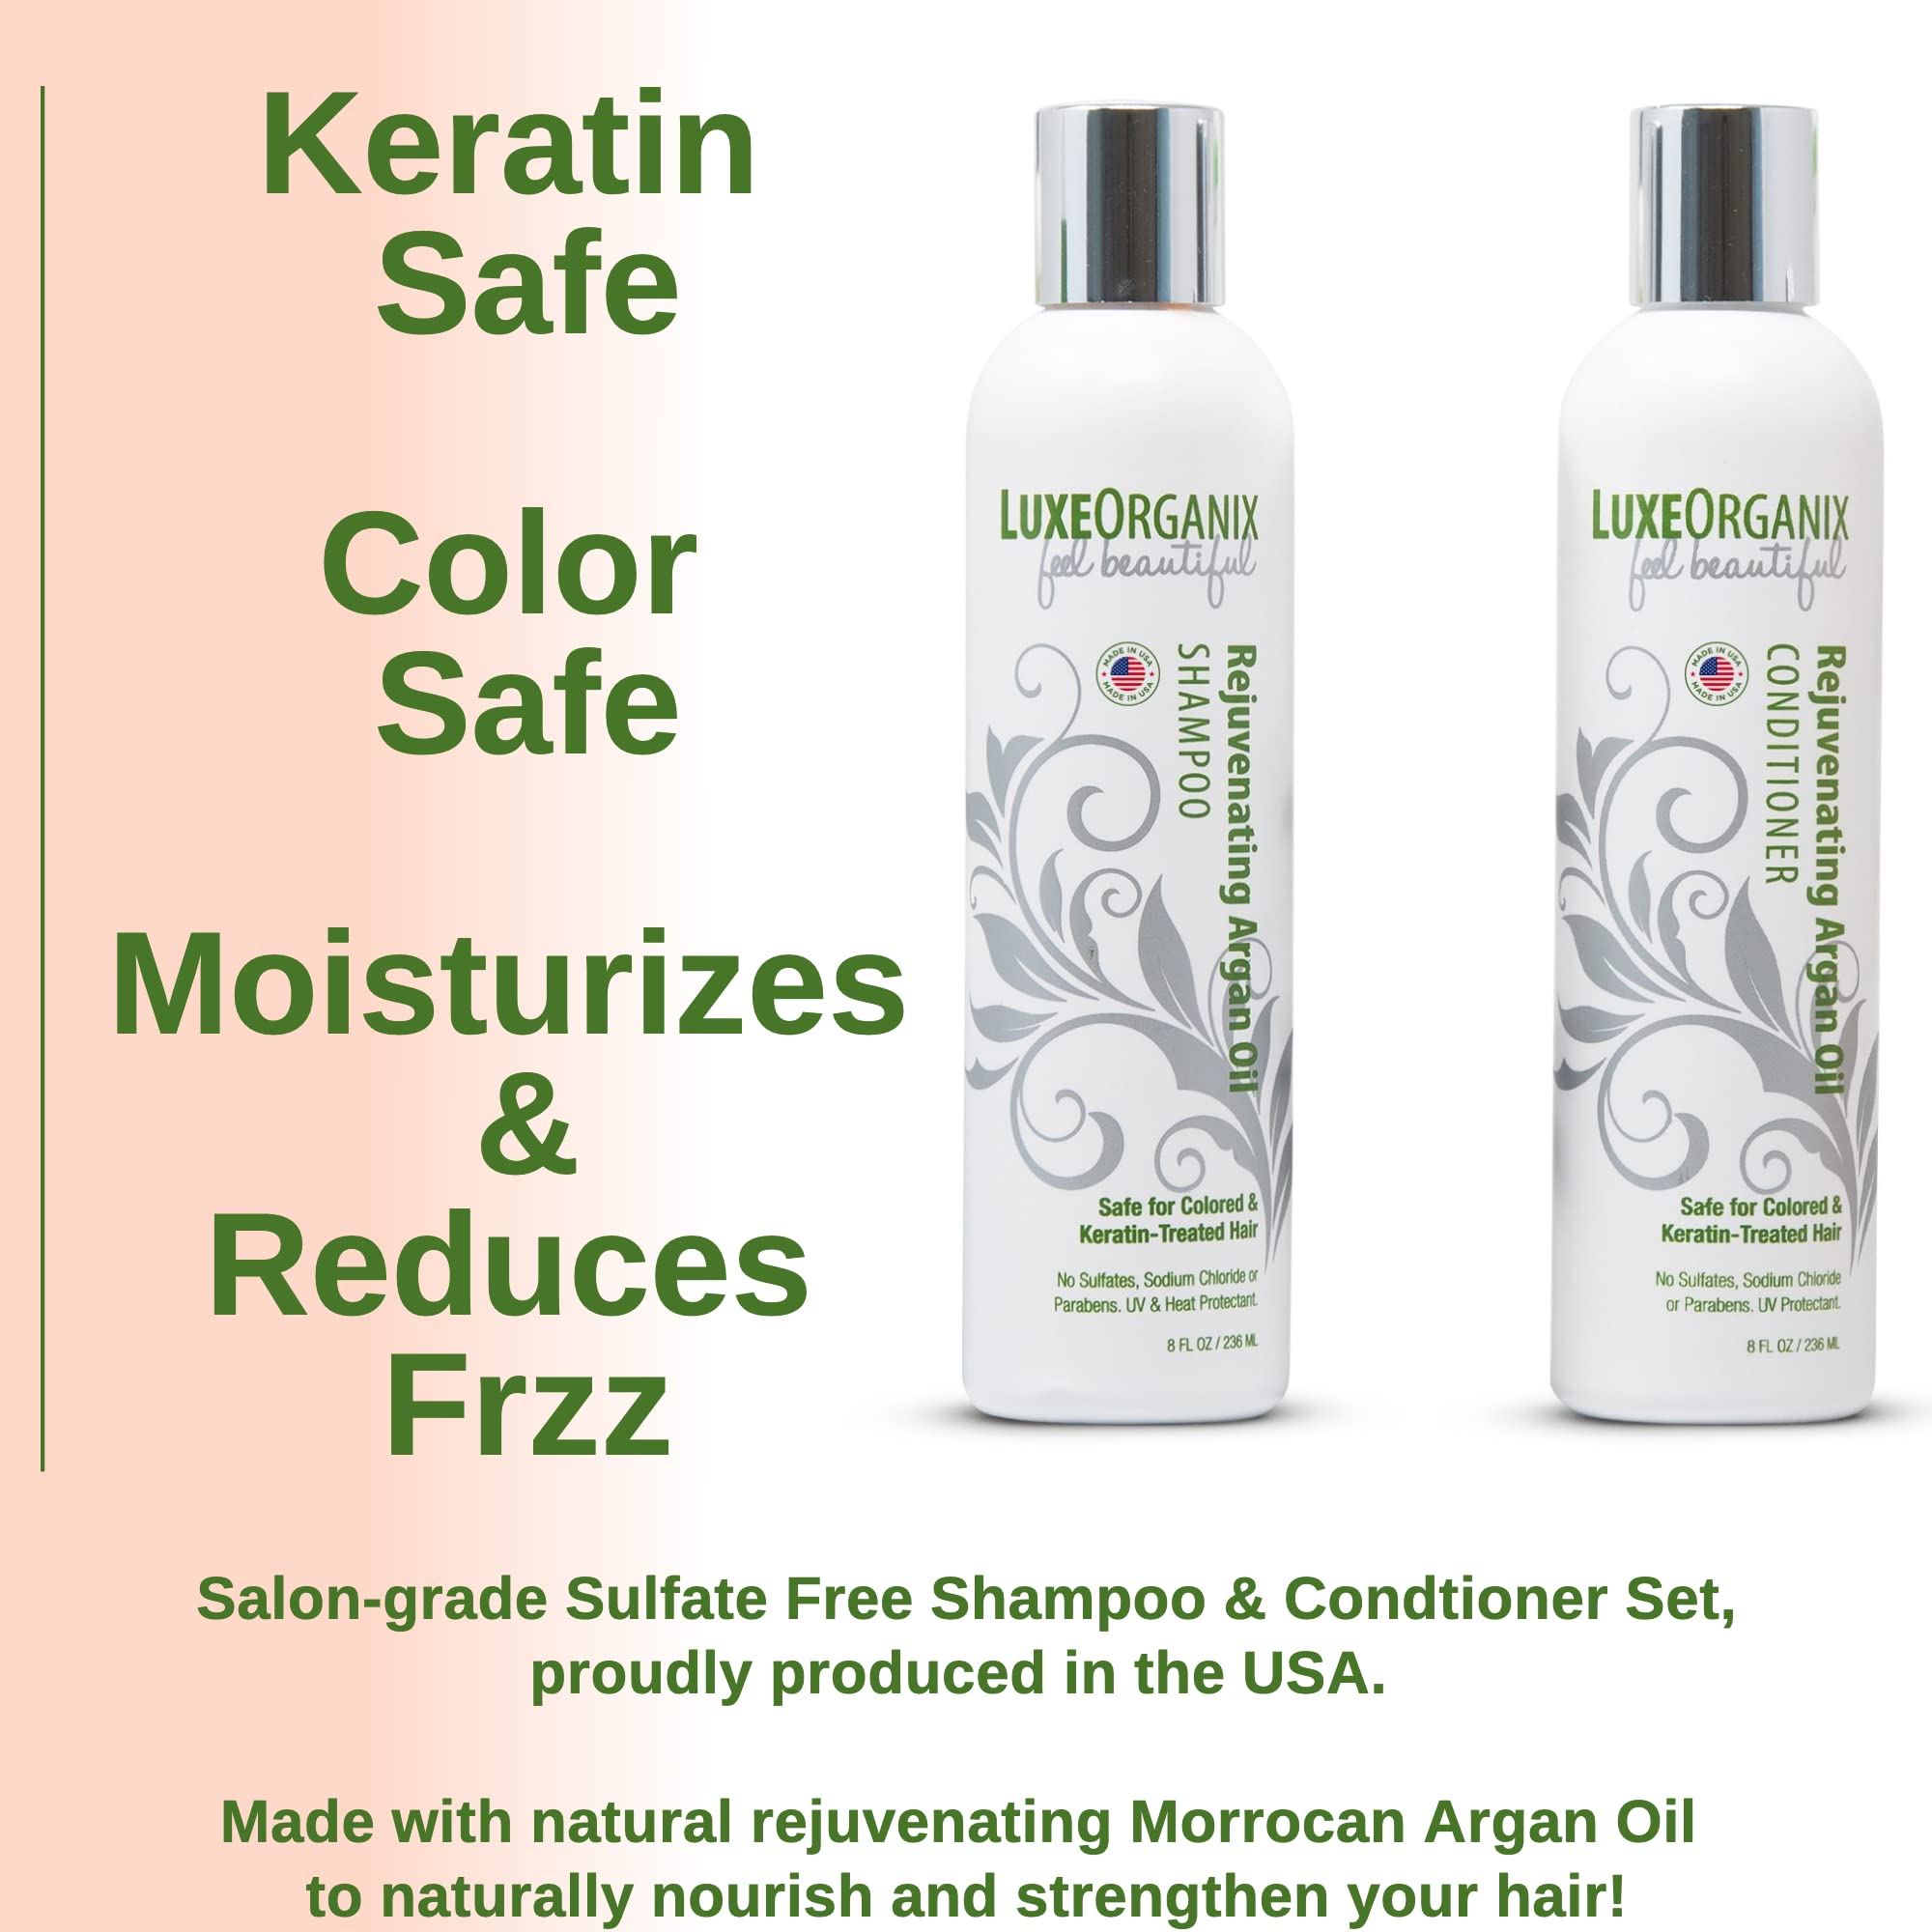 LuxeOrganix Shampoo and Conditioner for Keratin Treated Hair - Sulfate & Paraben Free - Moroccan Argan Oil Smooths & Moisturizes, Best for Dry, Damaged, Frizzy, & Curly Hair (8oz Set)